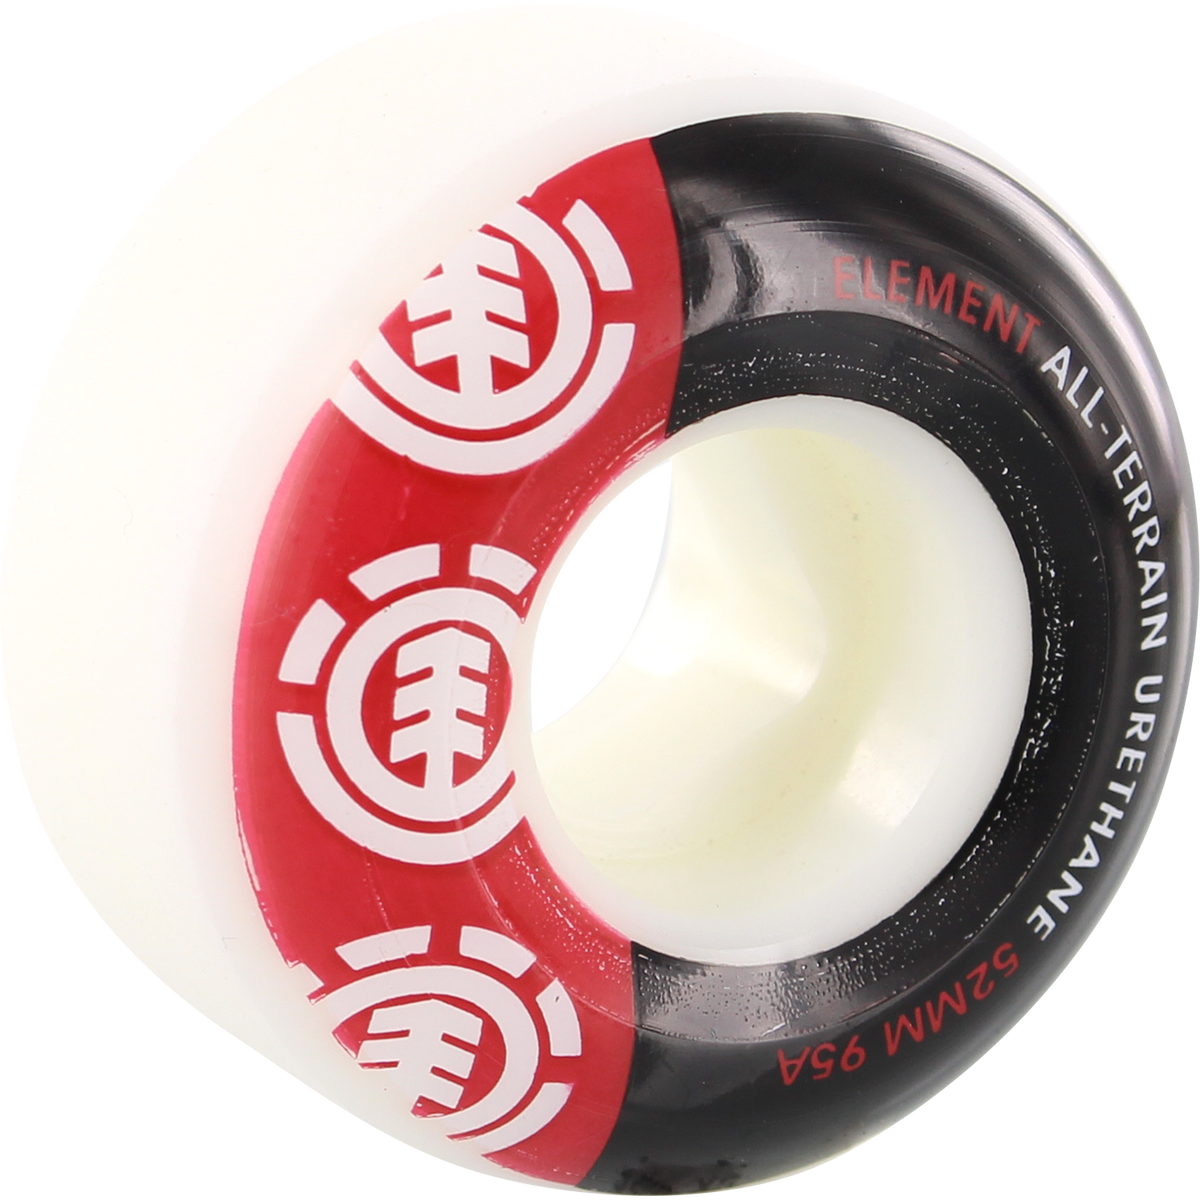 ELEMENT // SECTION 52mm WHT BLK/RED 95a at ppp